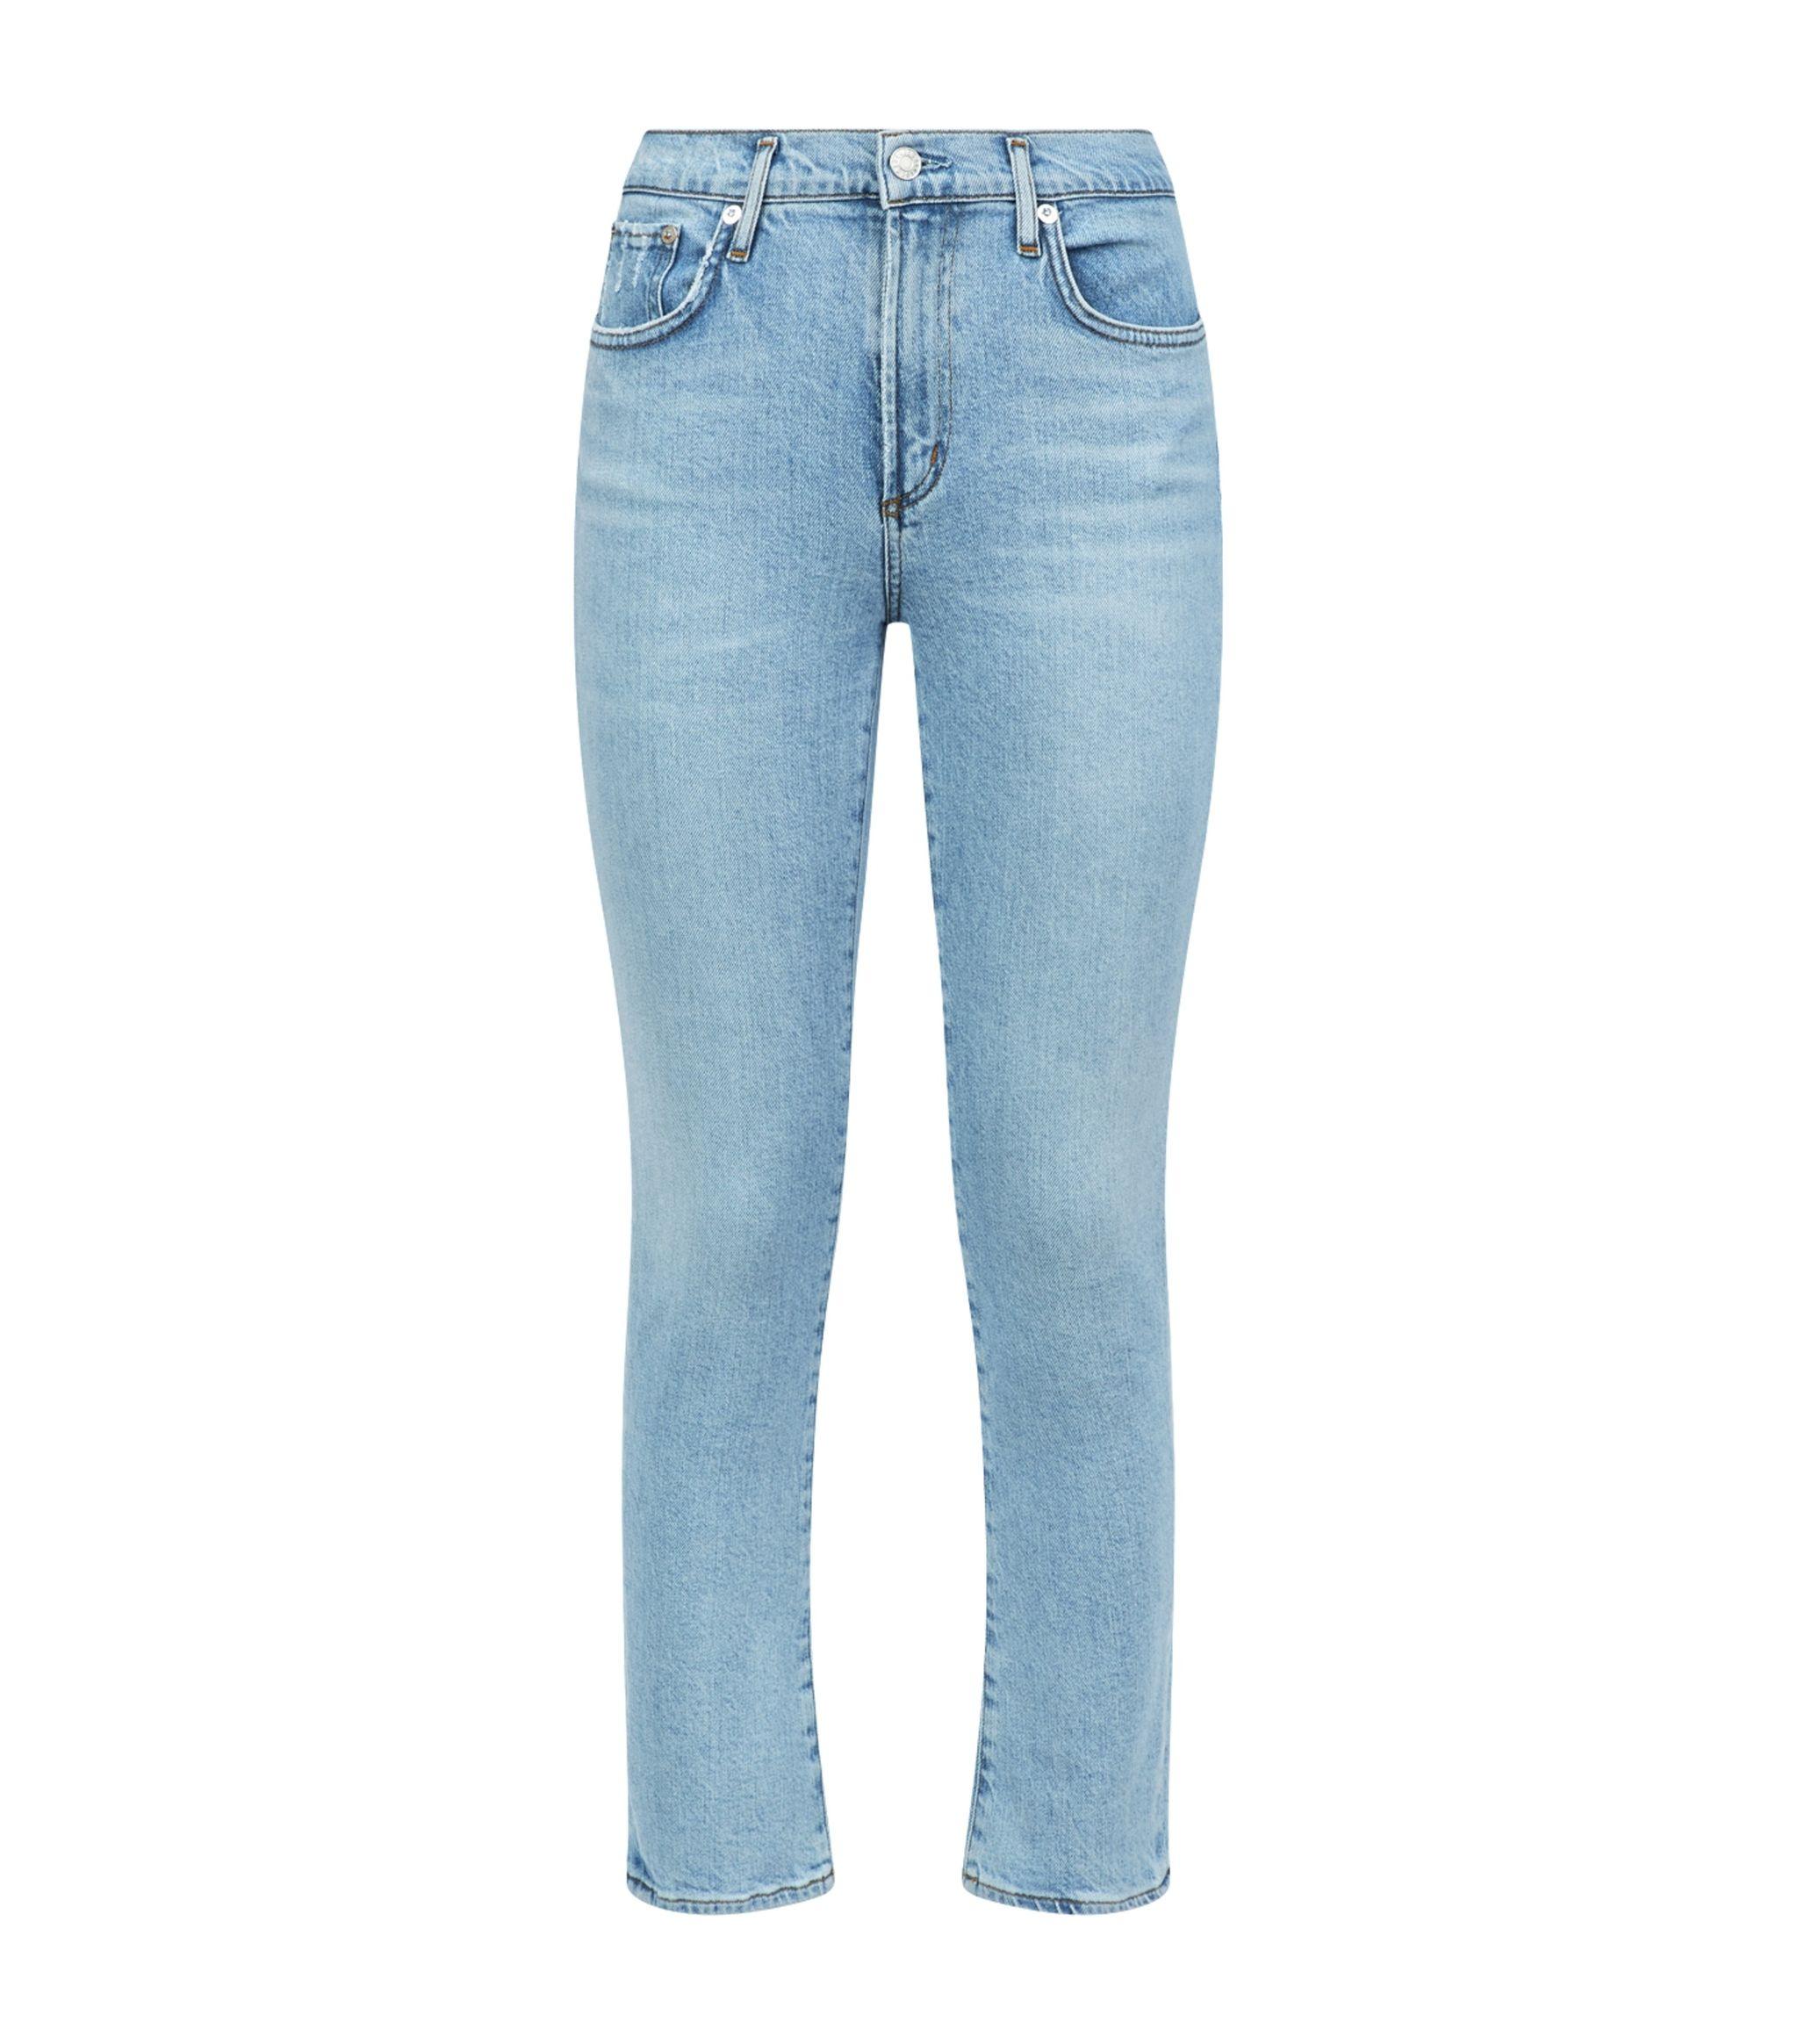 Agolde Denim Toni Mid-rise Straight Jeans in Blue - Lyst